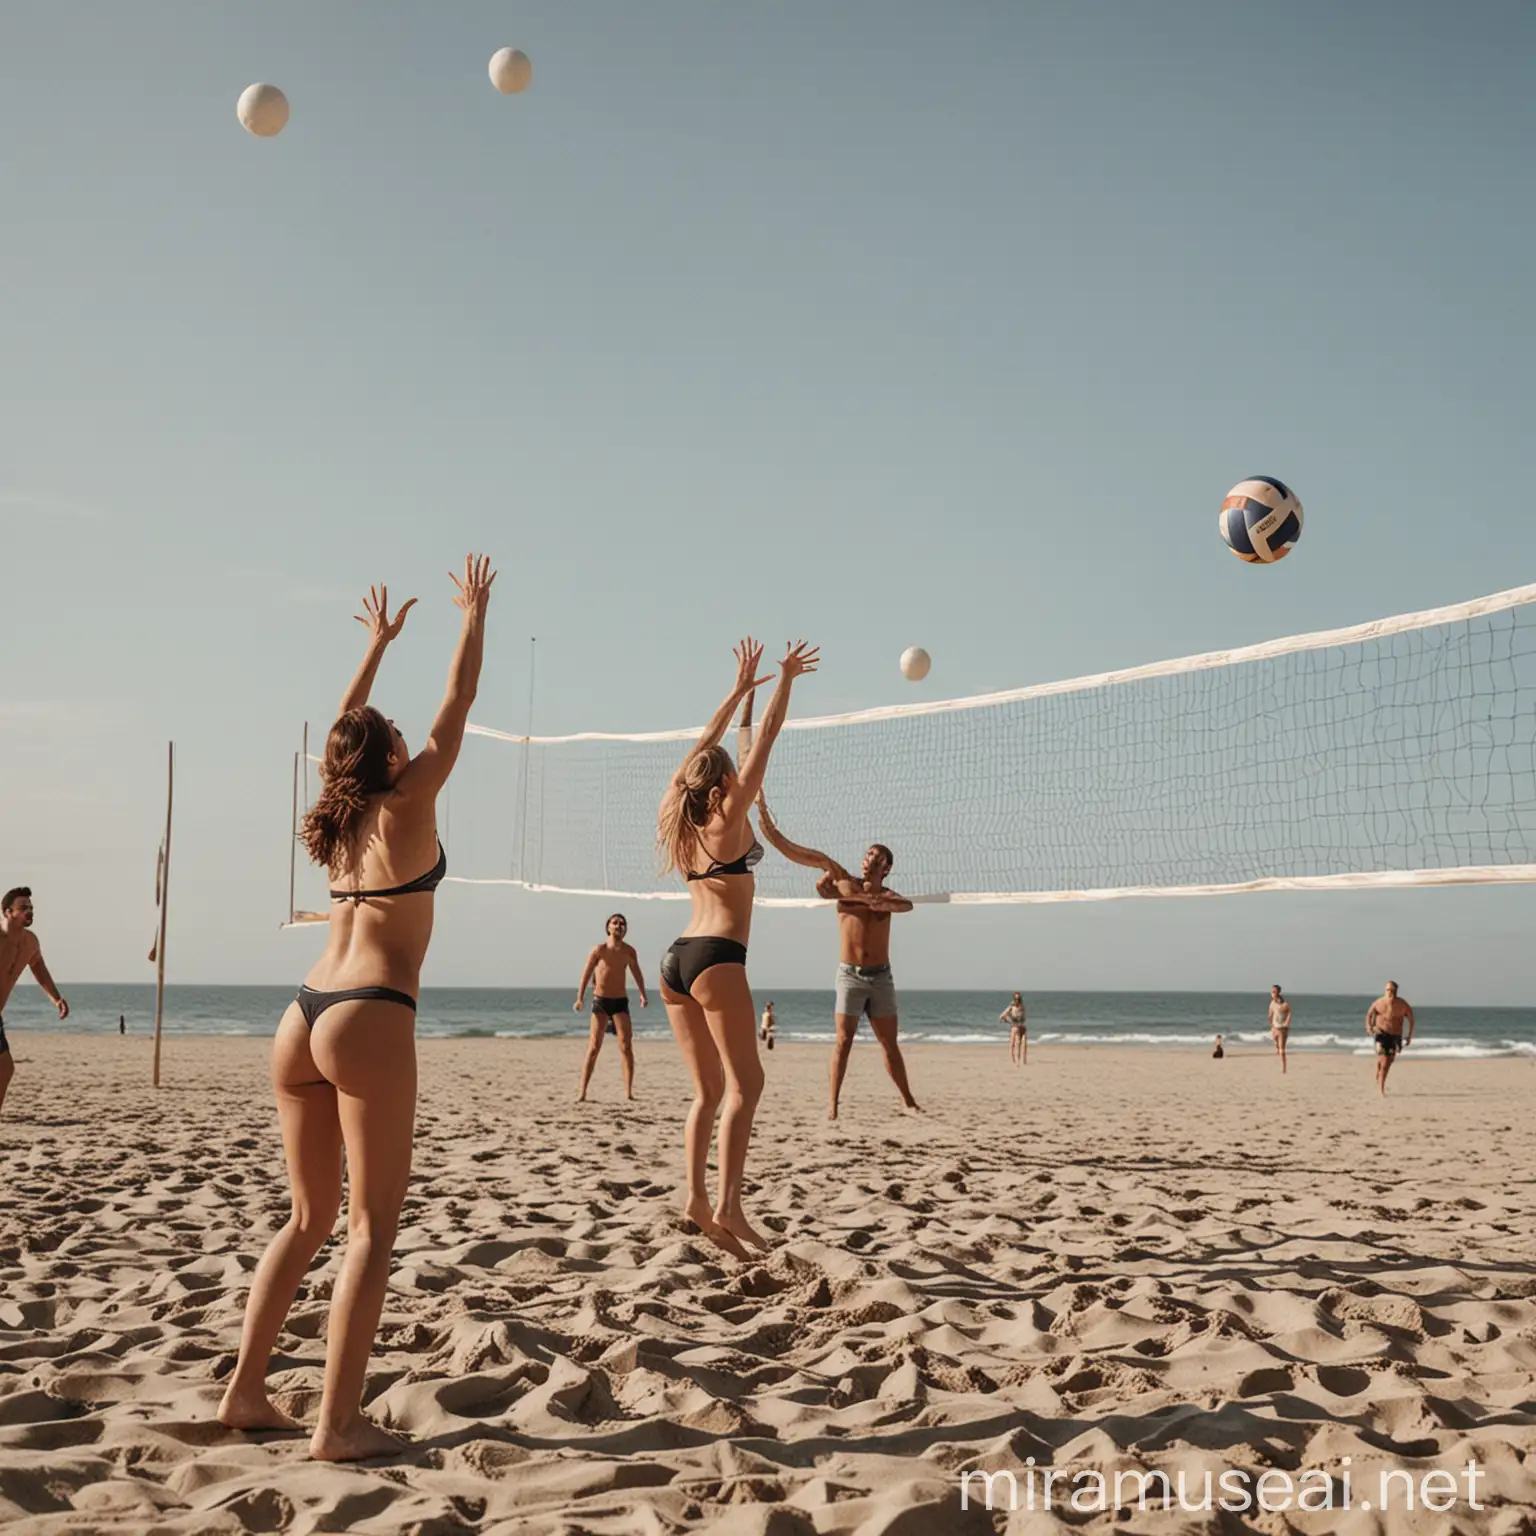 A group of man and woman playing volleyball on a beach